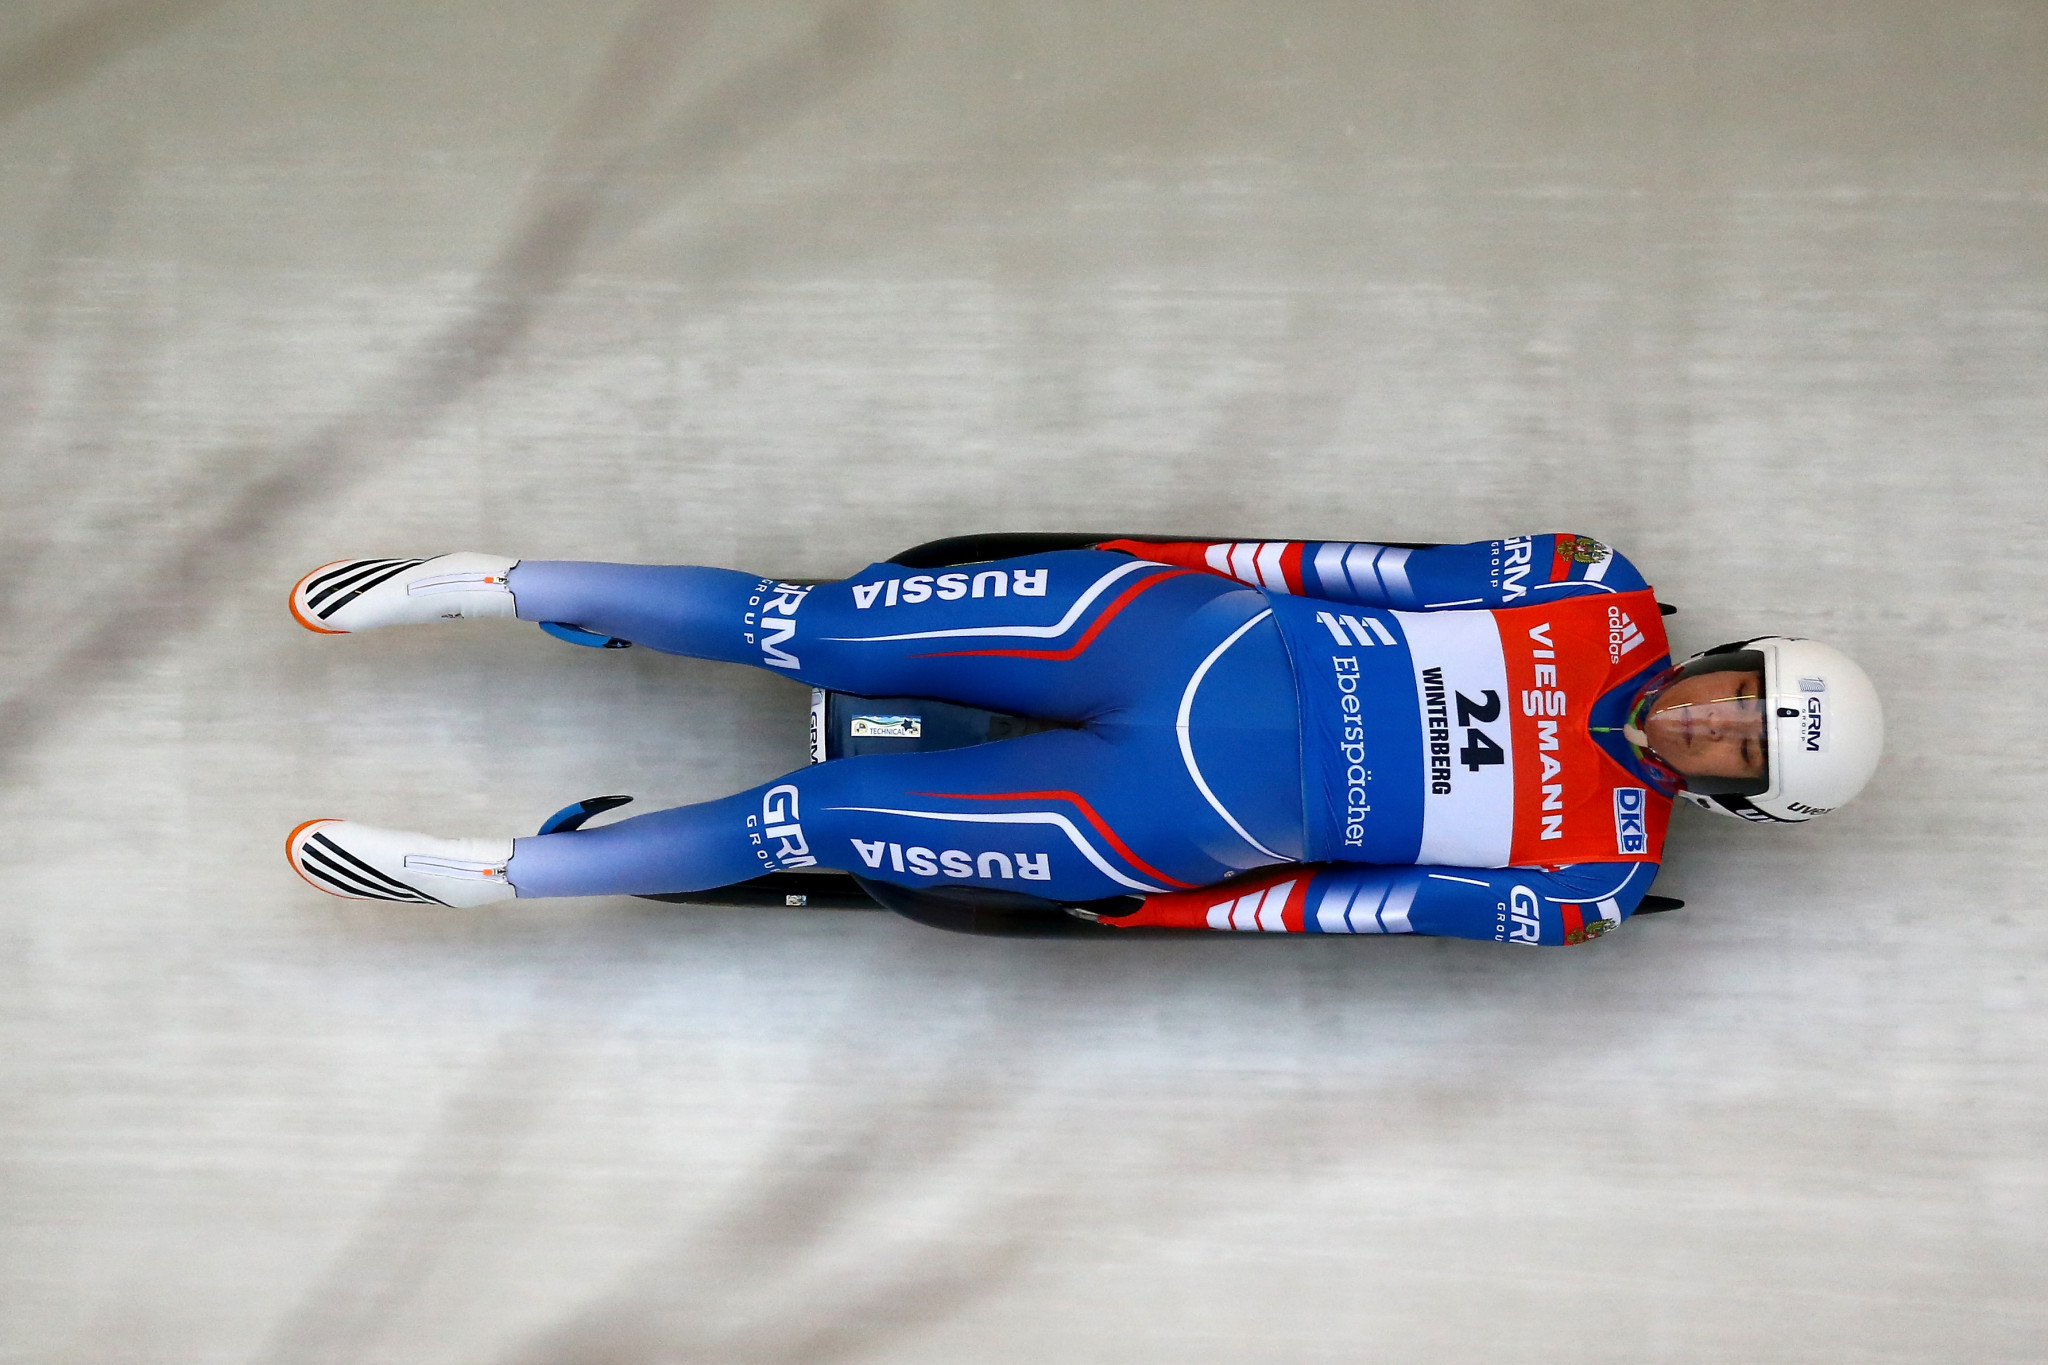 Ivanova among entrants at Luge World Cup in Königssee